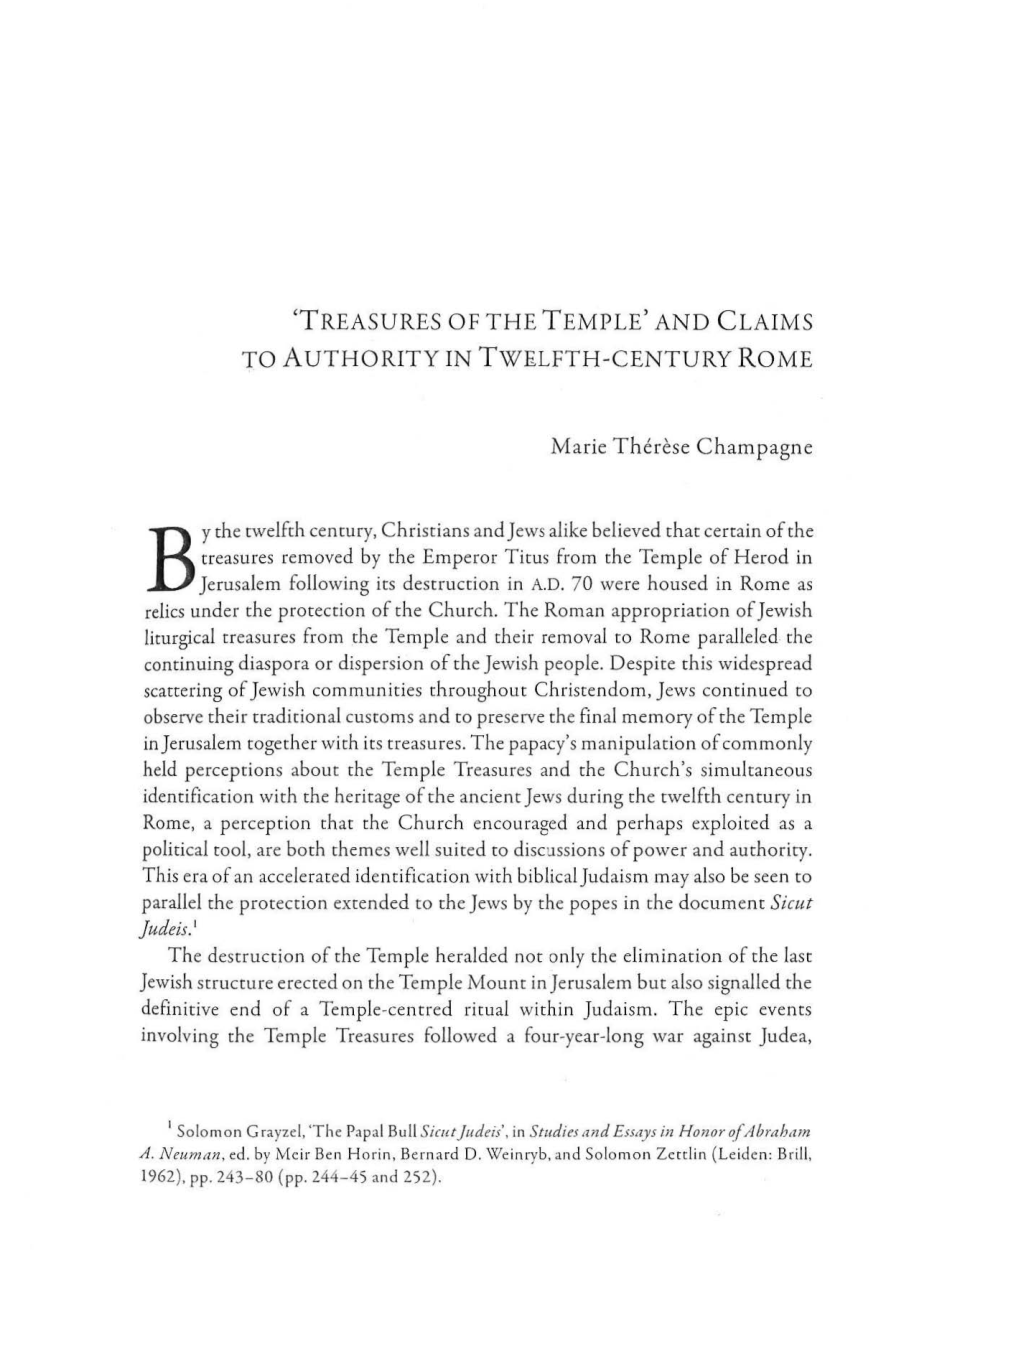 'Treasures of the Temple' and Claims to Authority in Twelfth-Century Rome